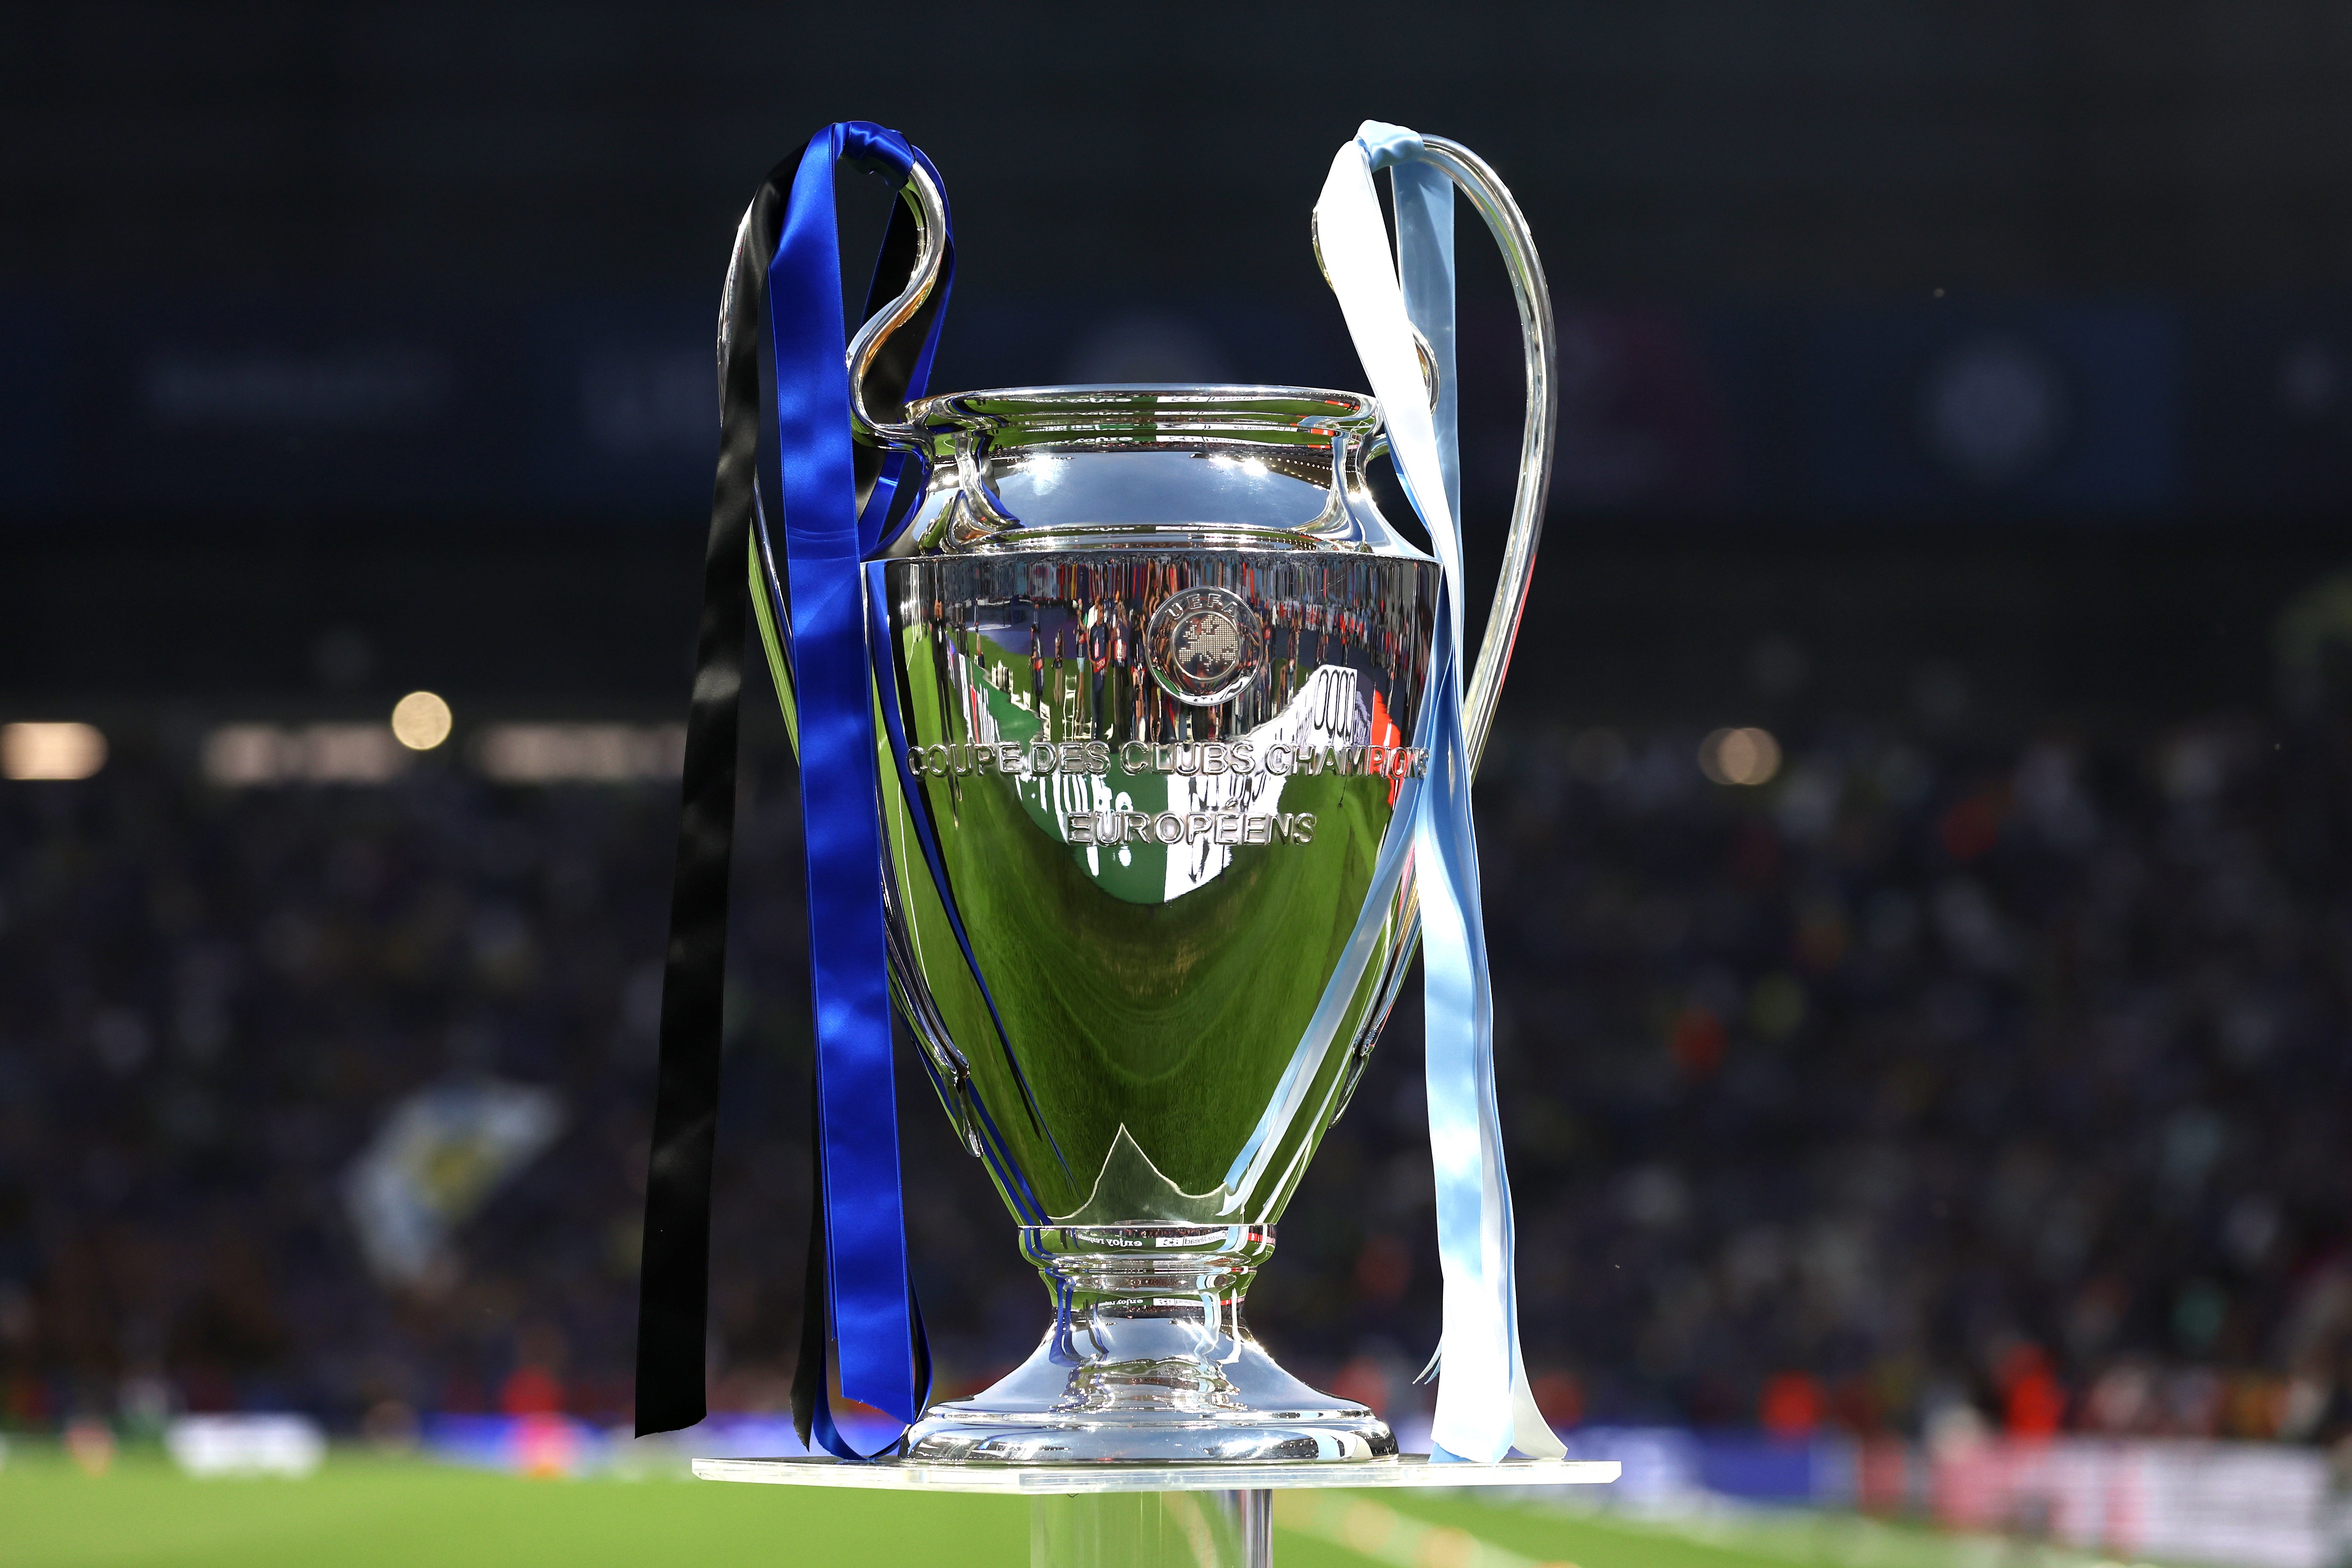 Lost its spark? The Champions League returns this week but lacks glamour ties